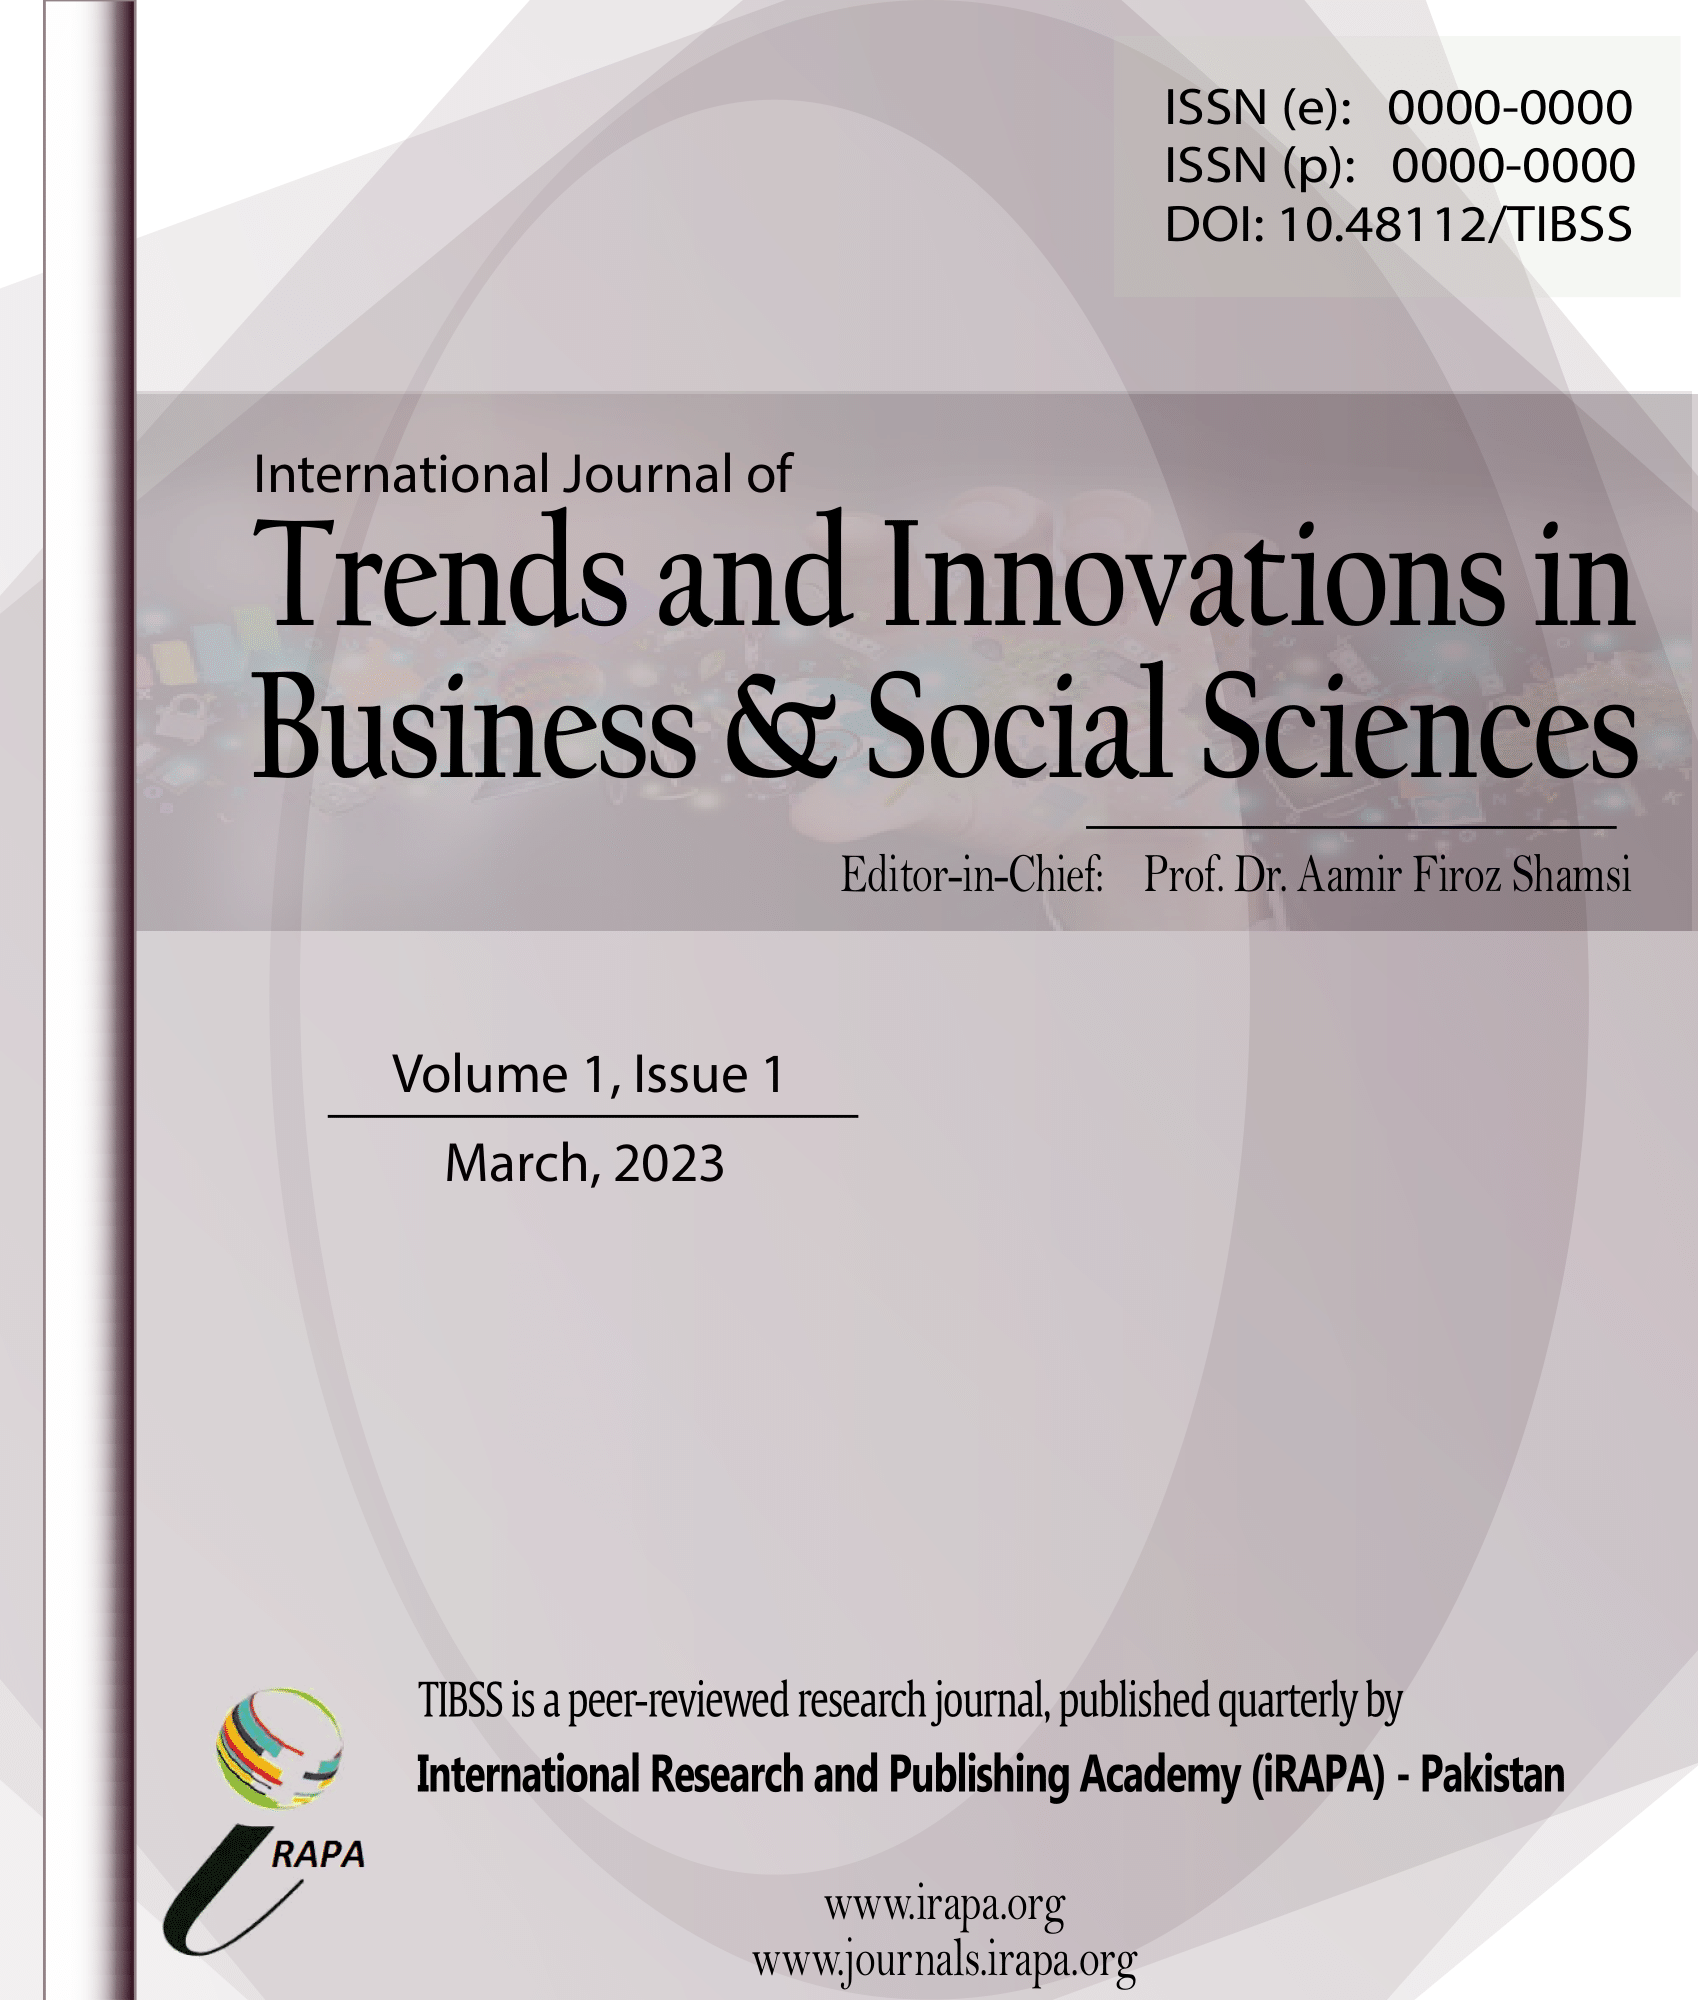 International Journal of Trends and Innovations in Business & Social Sciences